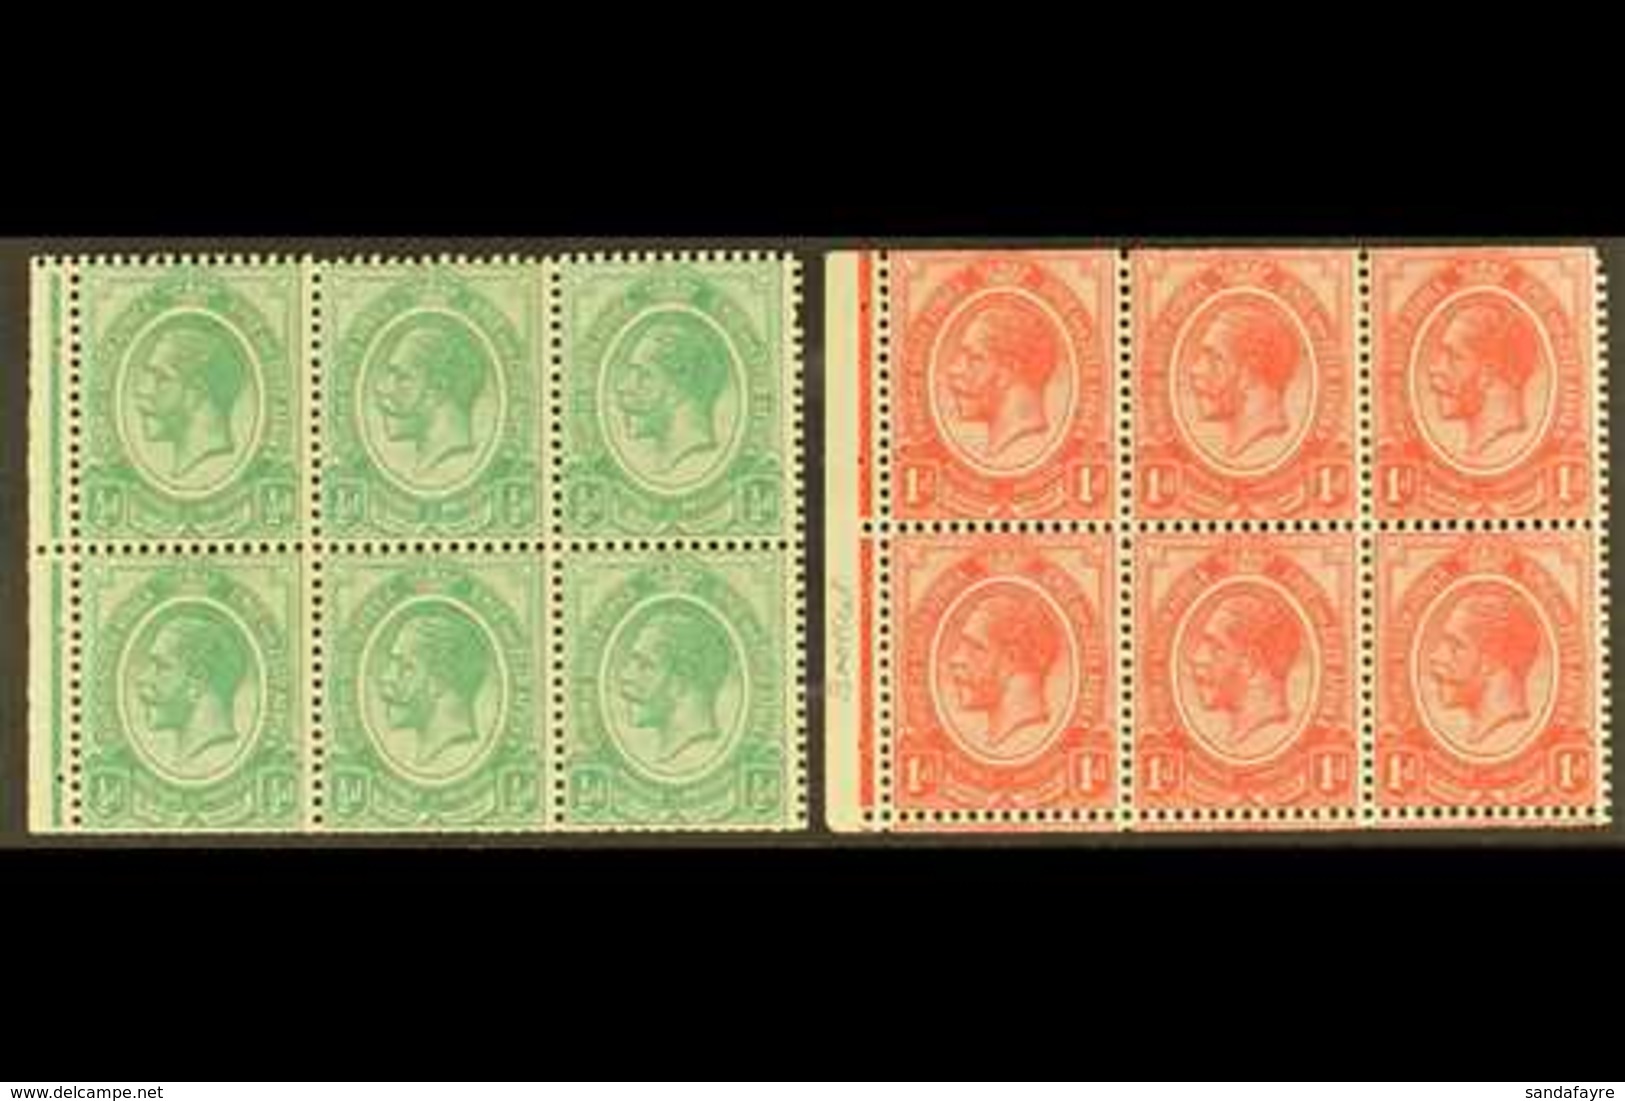 BOOKLET PANES 1913-20 ½d & 1d Panes, Wmk Inverted, SG 3/4, Fine Mint, Trimmed Perfs (2 Panes). For More Images, Please V - Unclassified